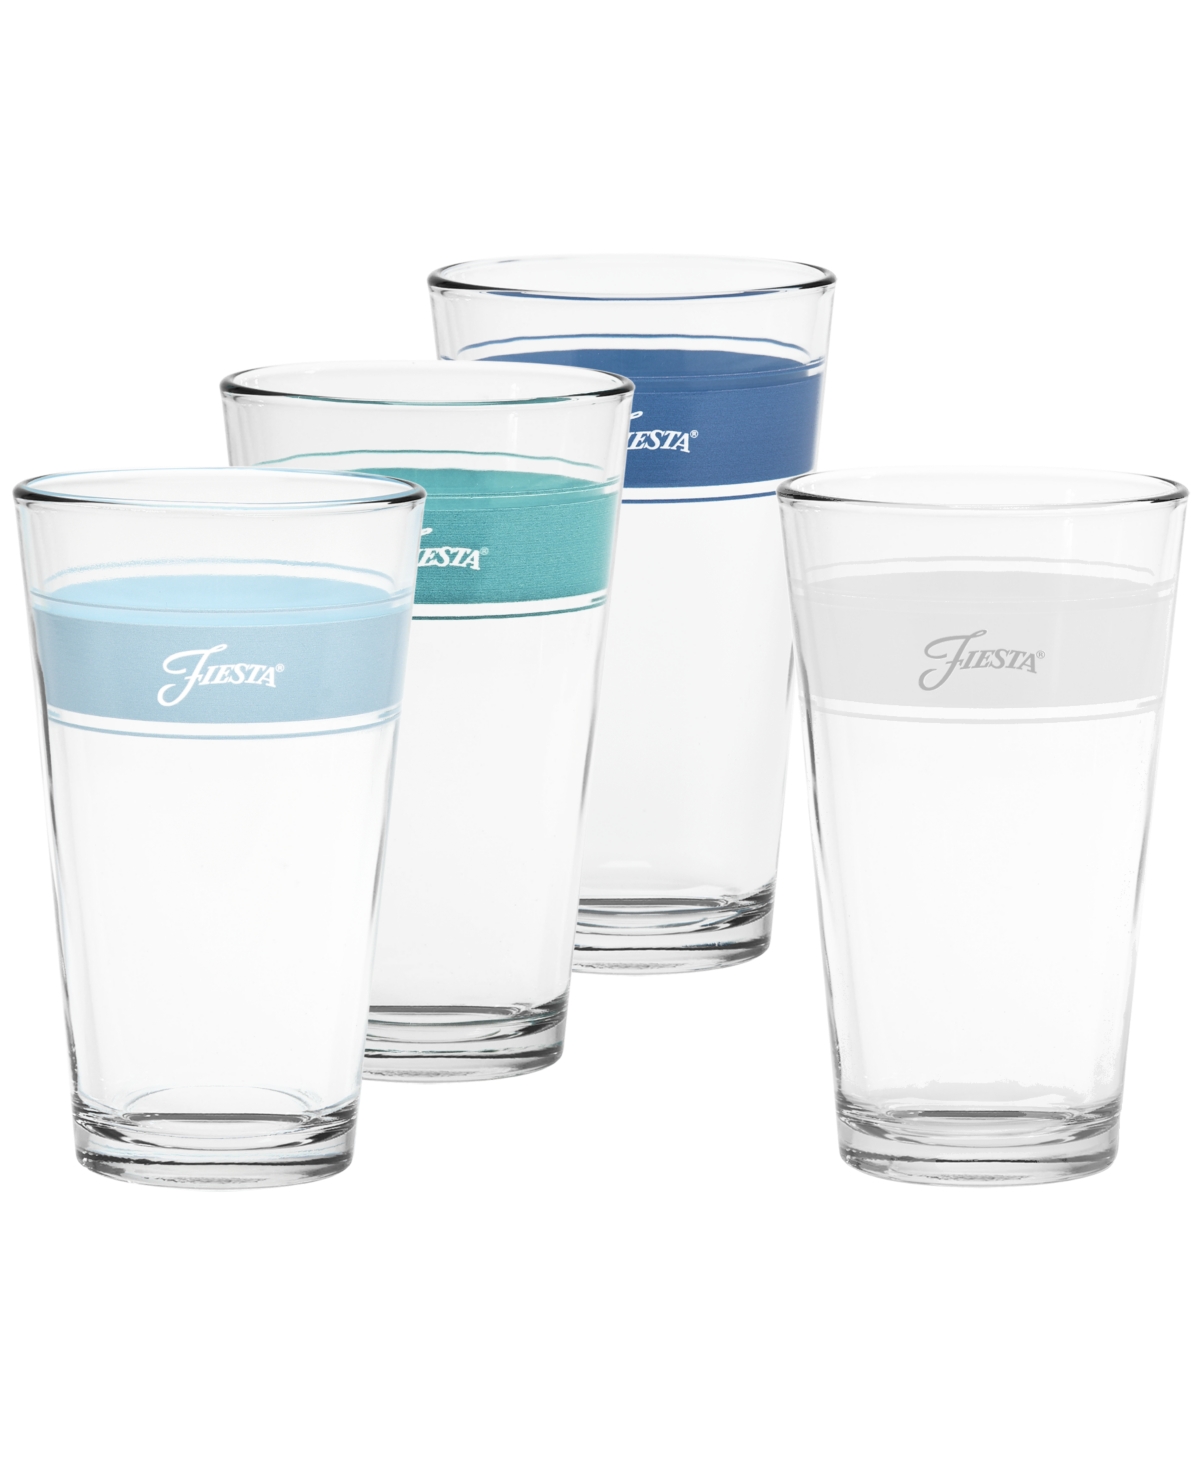 Fiesta Coastal Blues Frame 16-ounce Tapered Cooler Glass Set Of 4 In Multi